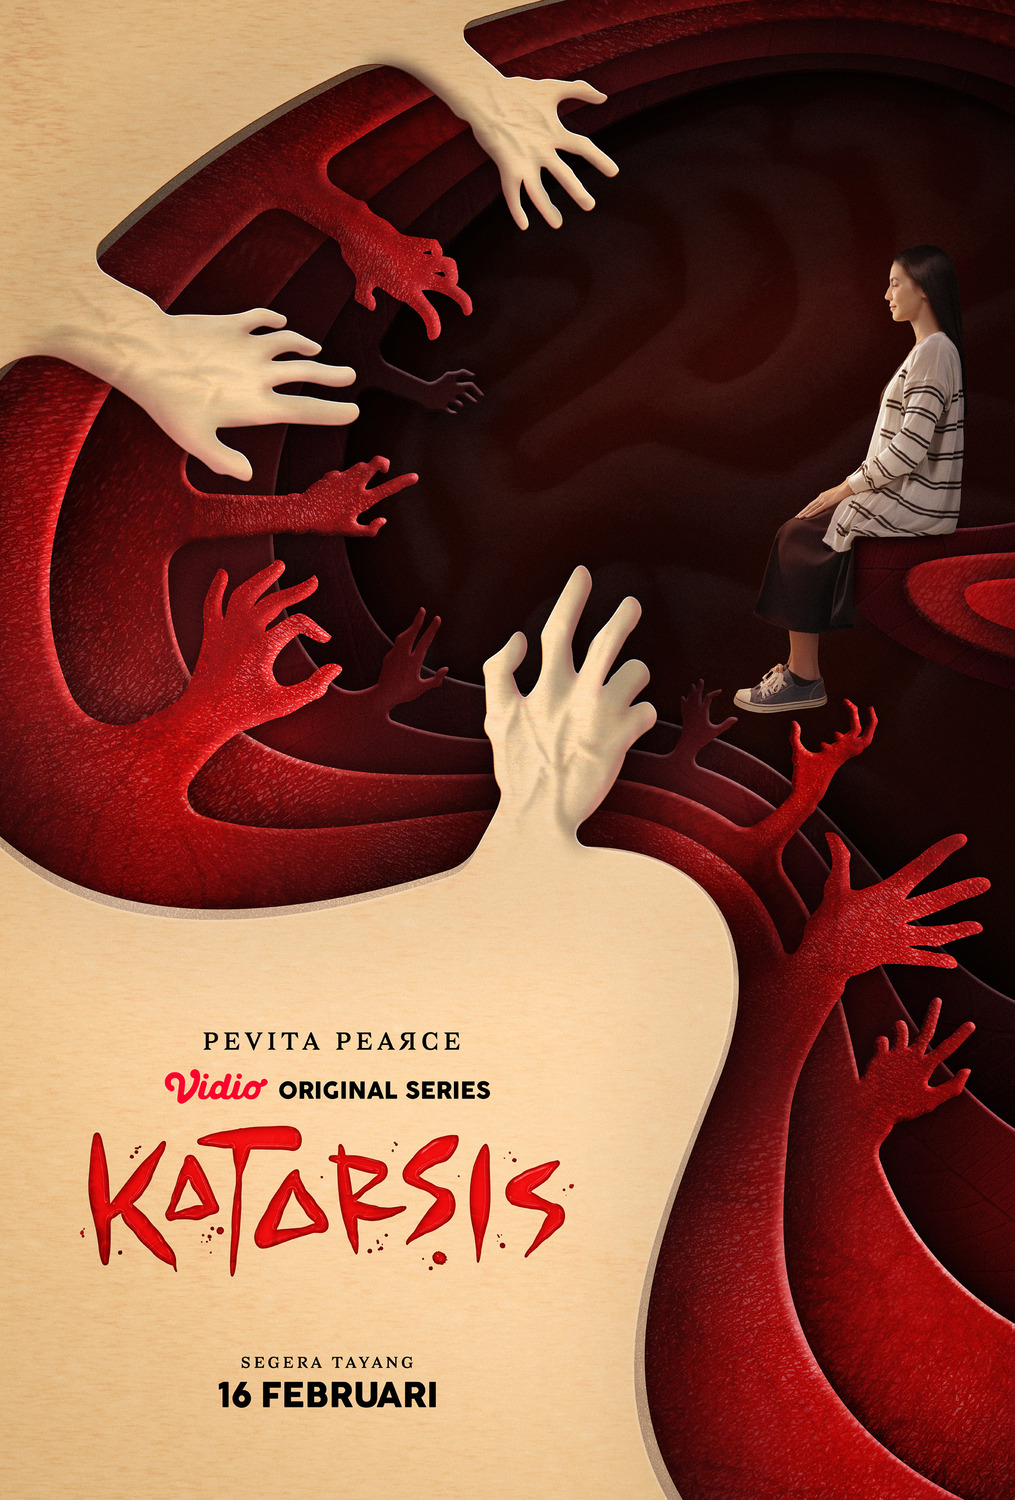 Extra Large TV Poster Image for Katarsis 